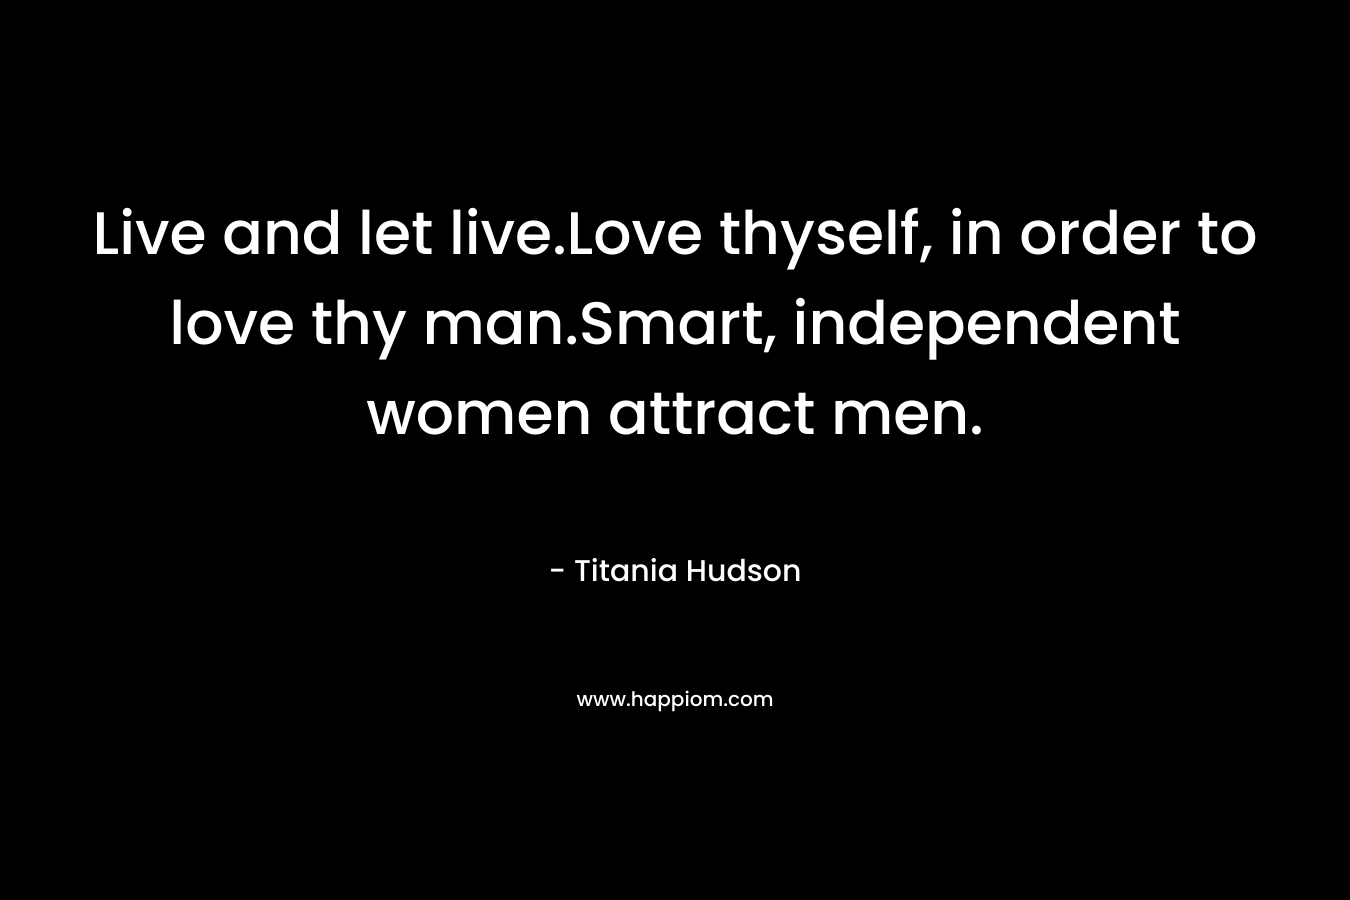 Live and let live.Love thyself, in order to love thy man.Smart, independent women attract men. – Titania Hudson